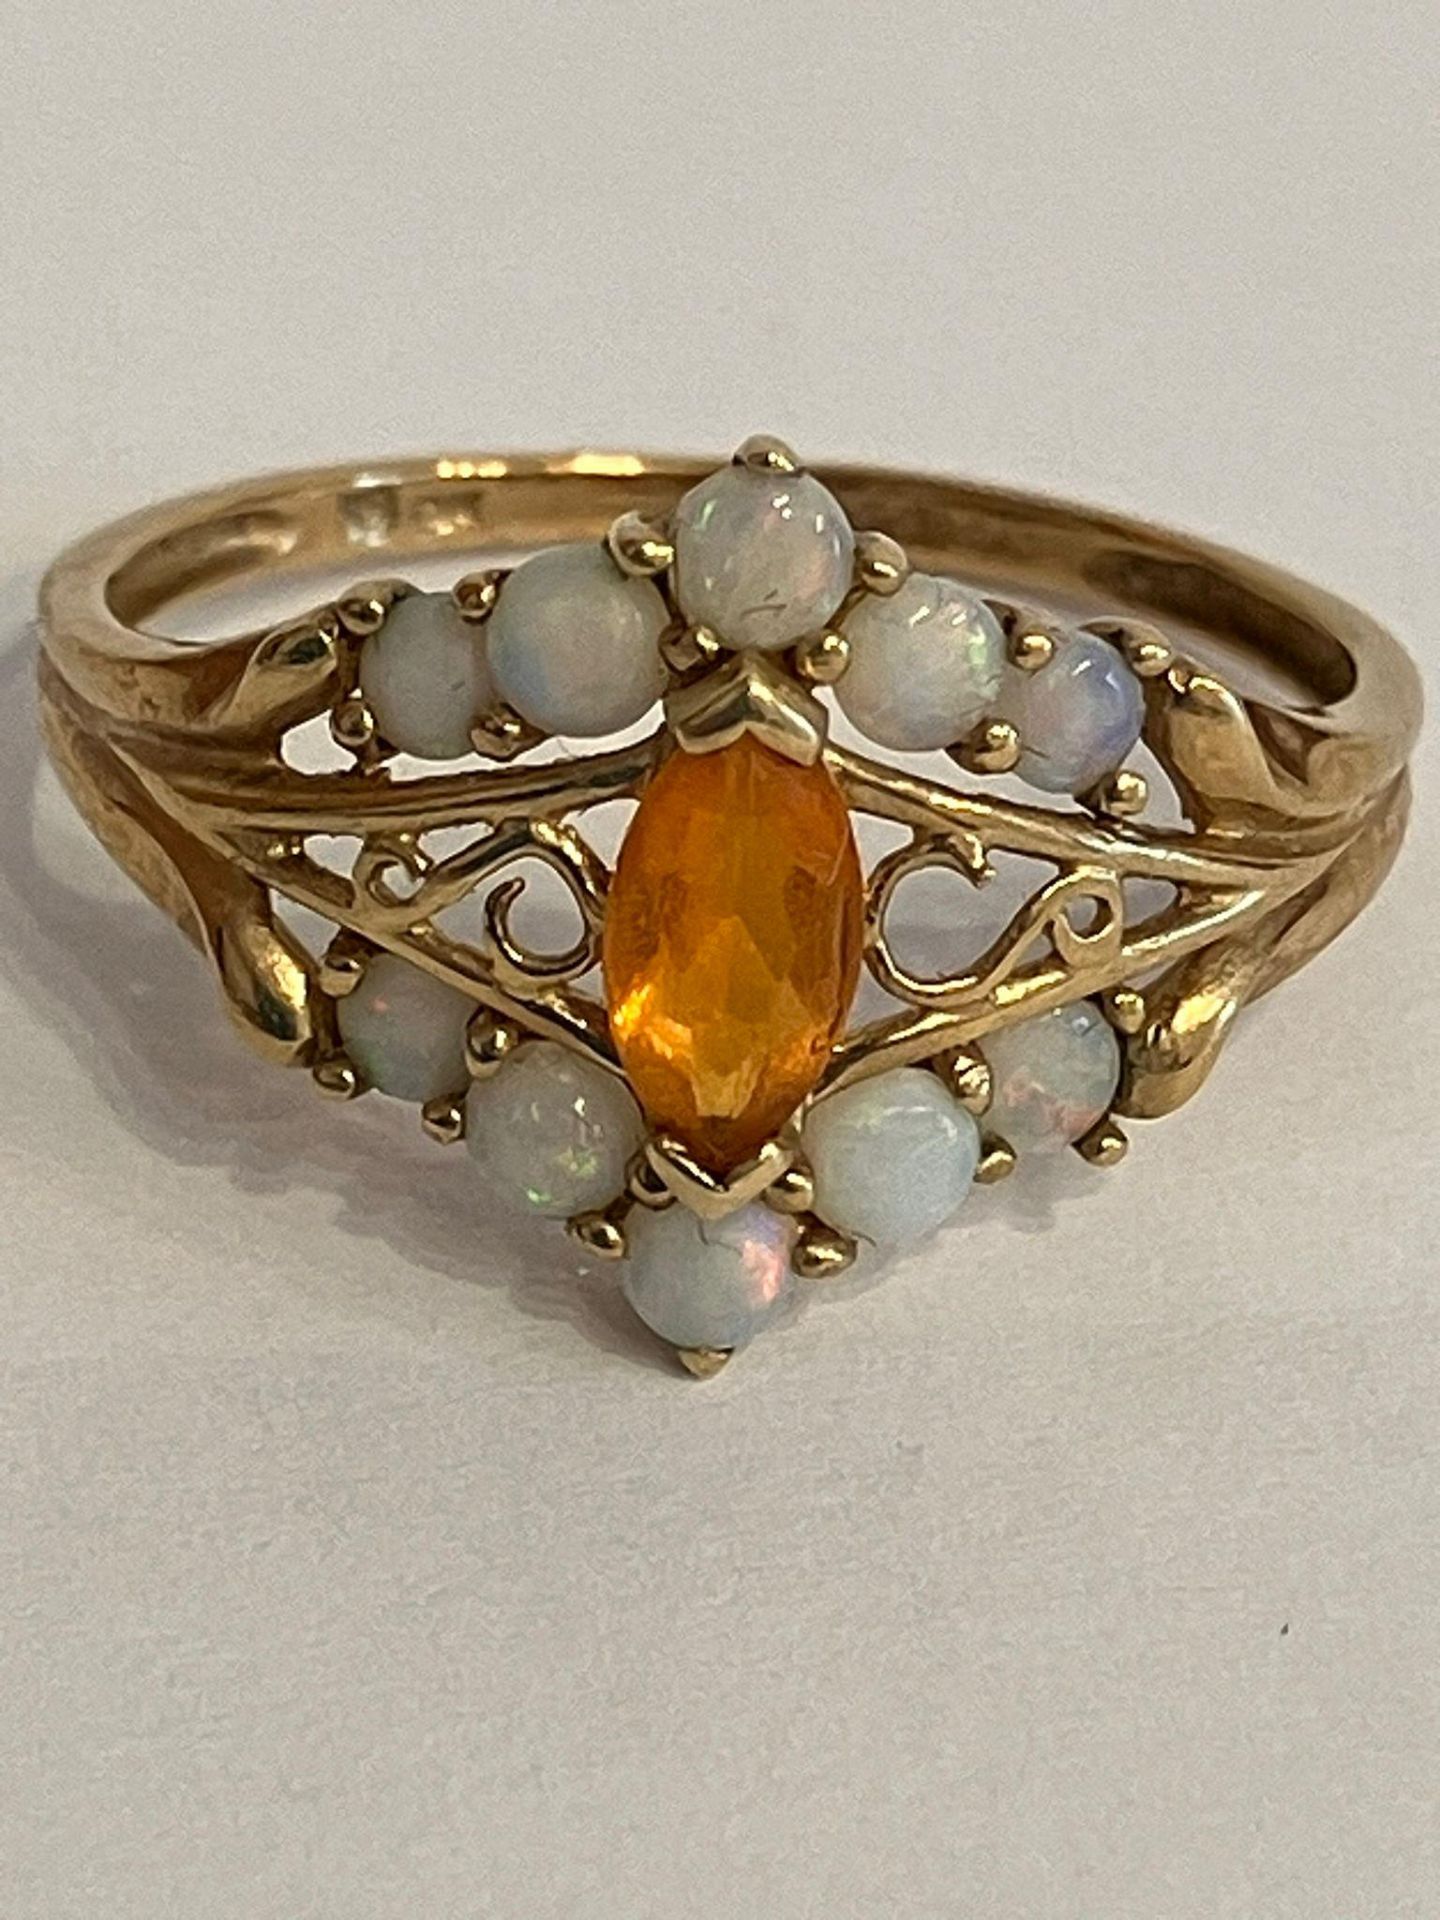 9 carat YELLOW GOLD RING,set with OPAL and Orange Baguette. Having attractive GOLD filigree detail